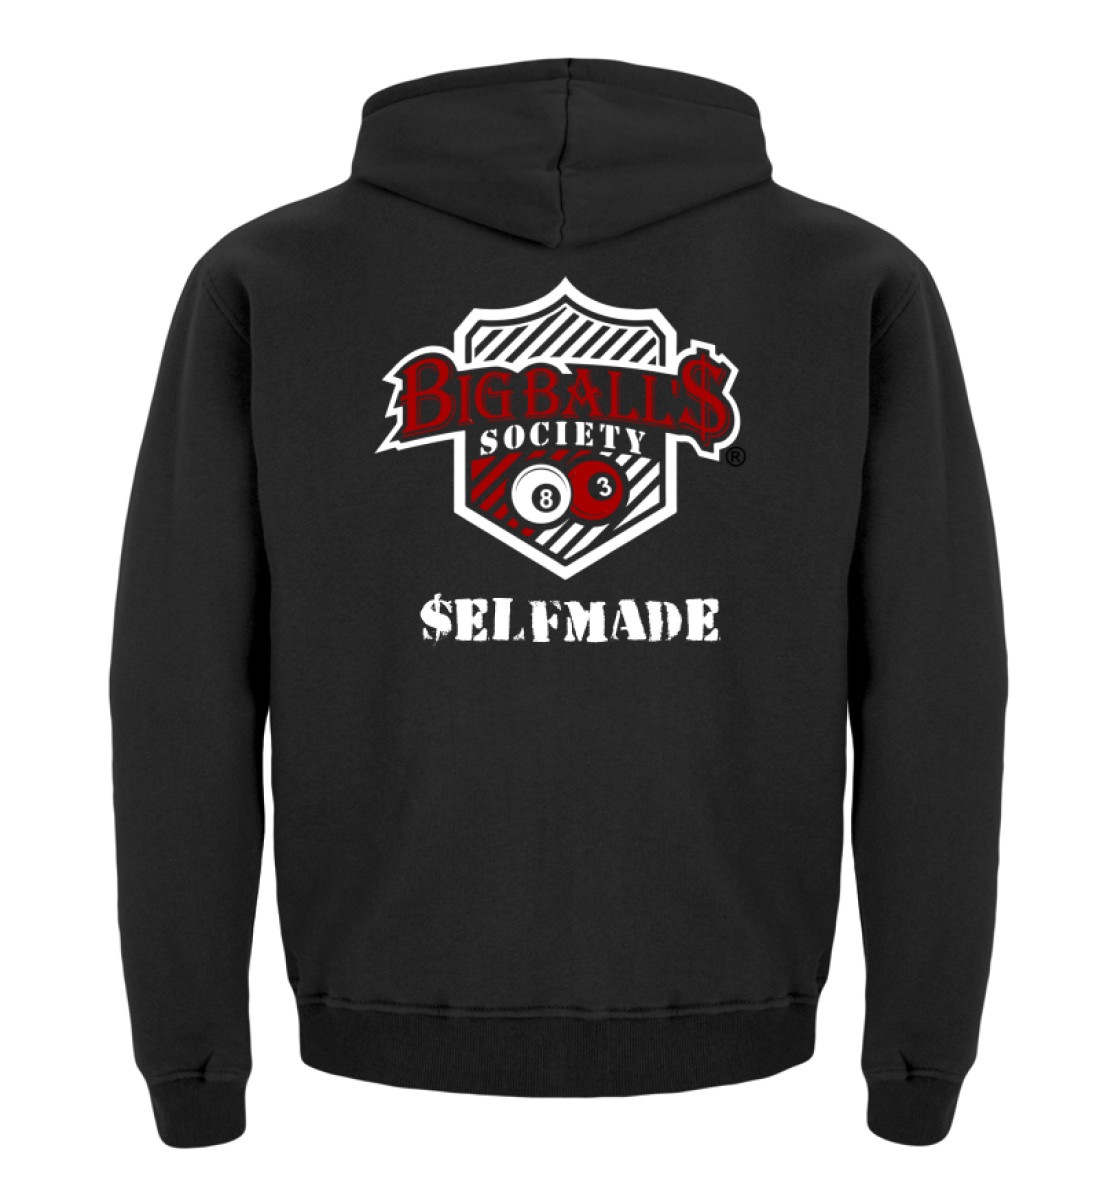 $elfmade White/ Red by Big Ball'$ Society  - Kinder Hoodie